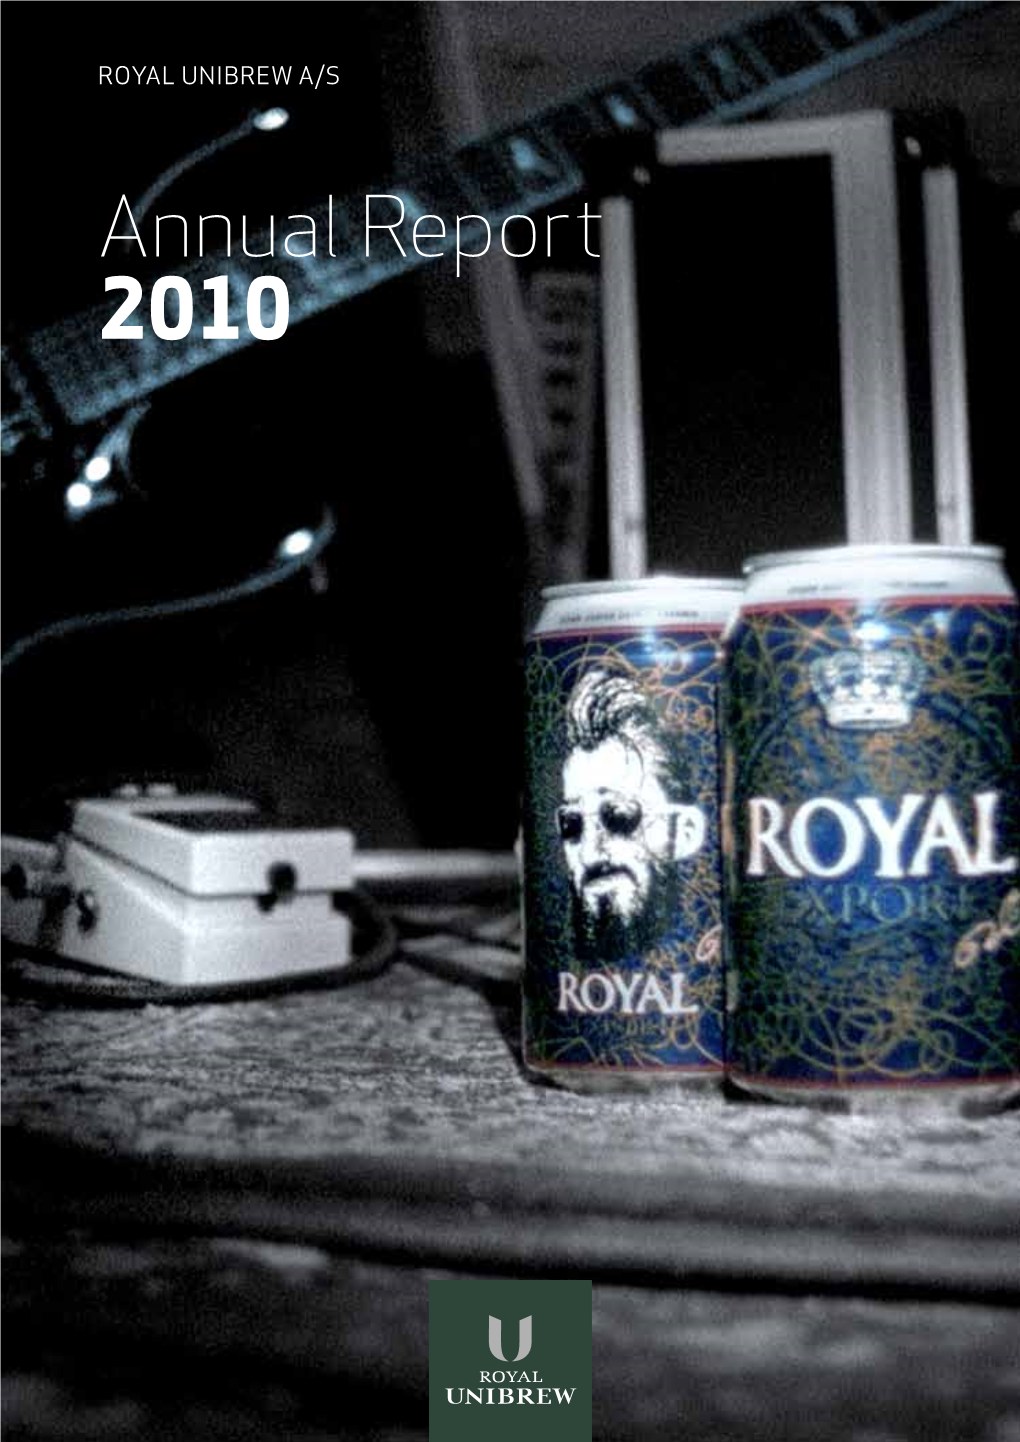 Annual Report 2010 Royal Unibrew Produces, Markets, Sells and Distributes Quality Beverages